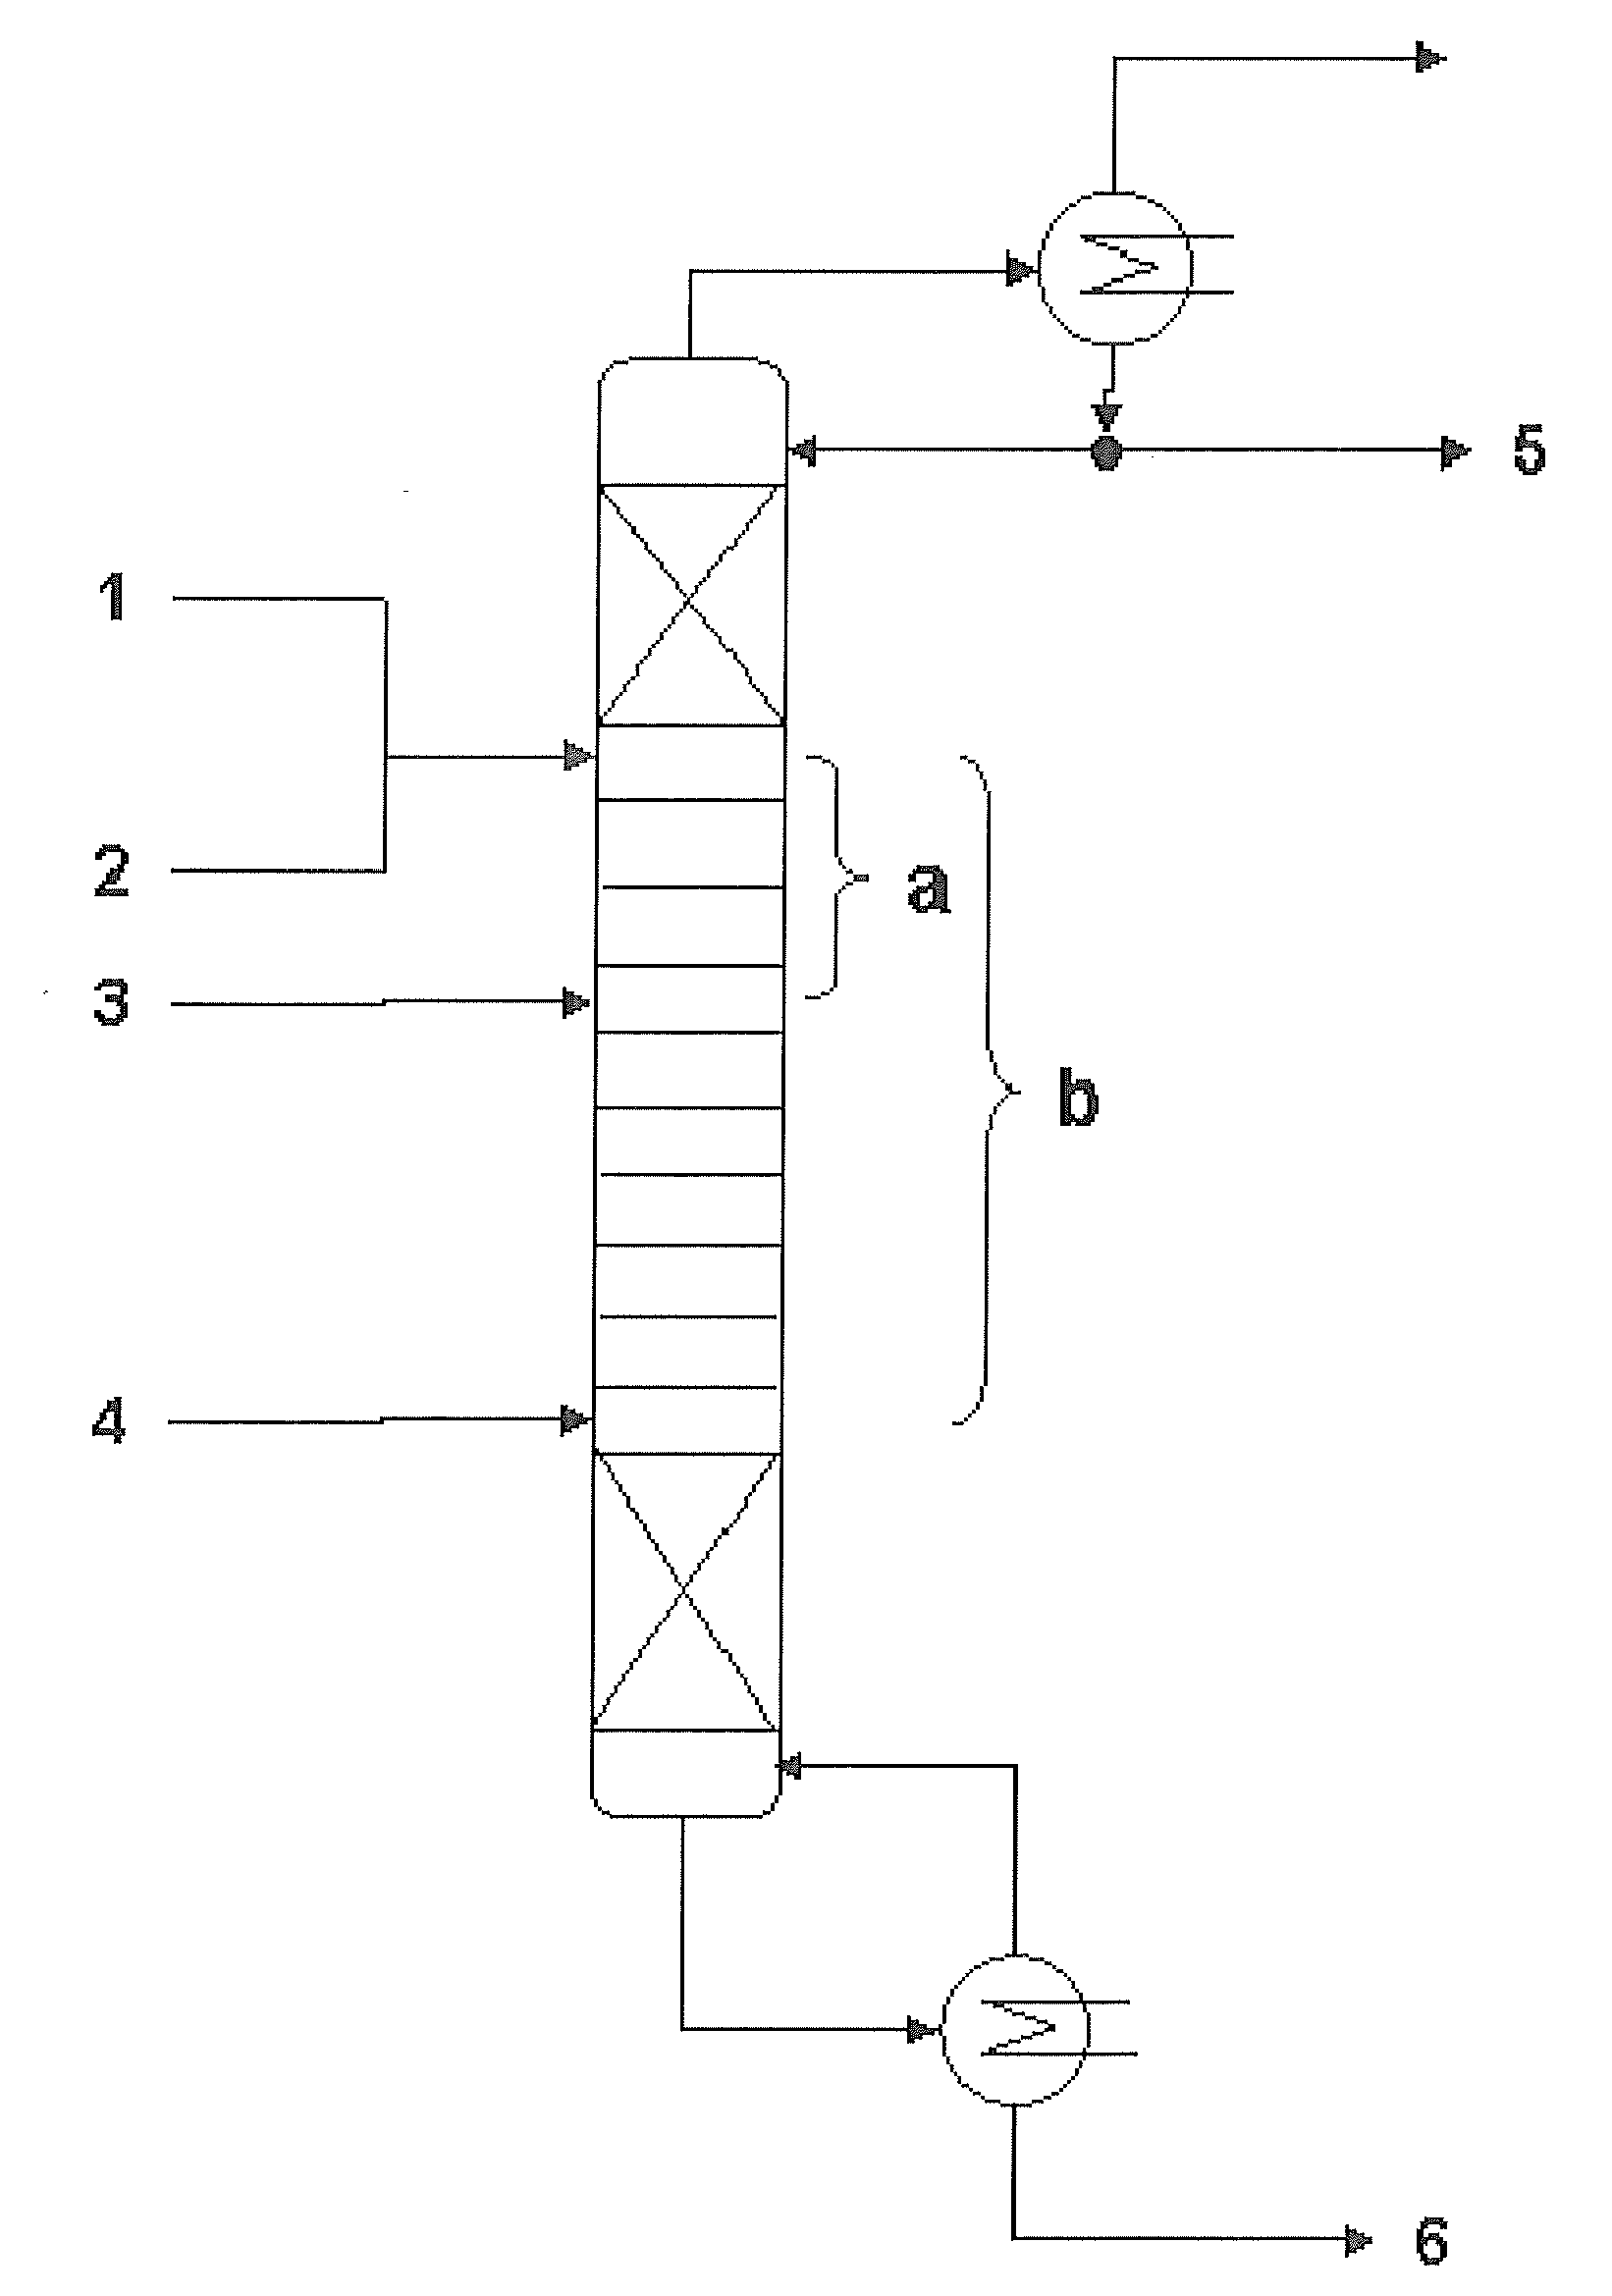 Process for preparing dialkyl carbonates from alkylene carbonates and alcohols